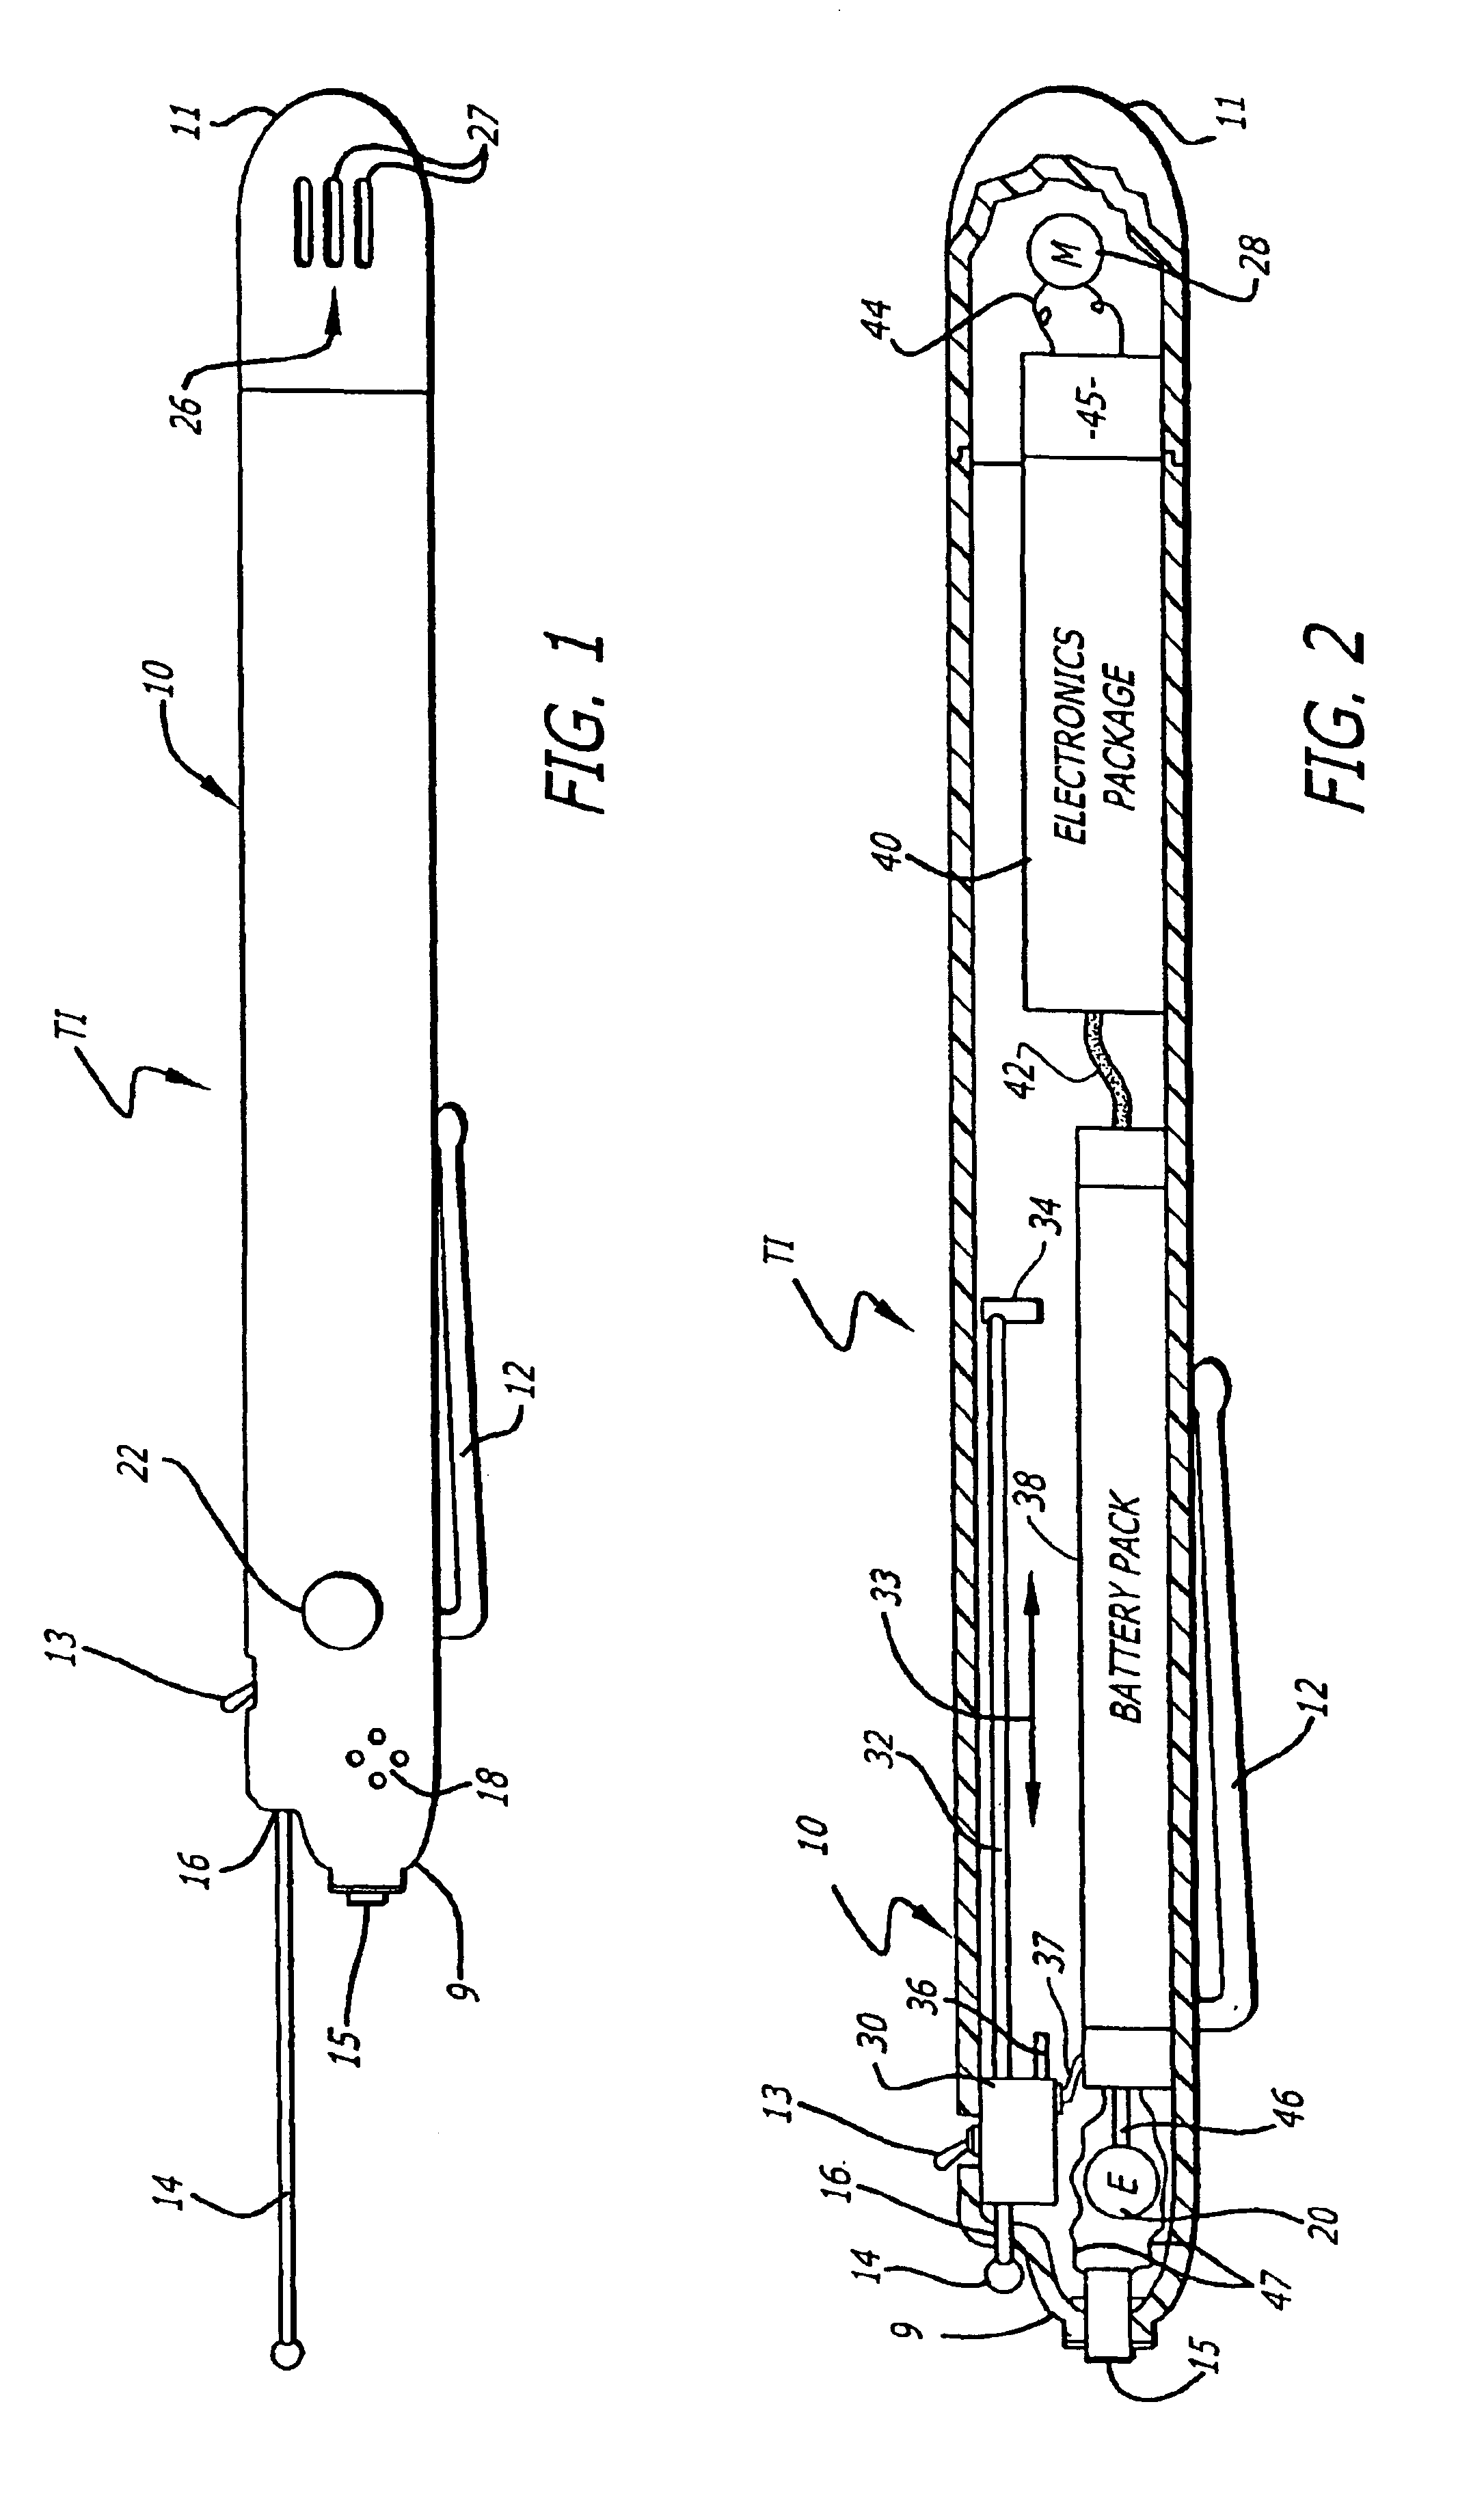 Mobile keyless telephone instruments and wireless telecommunications system having voice dialing and voice programming capabilities